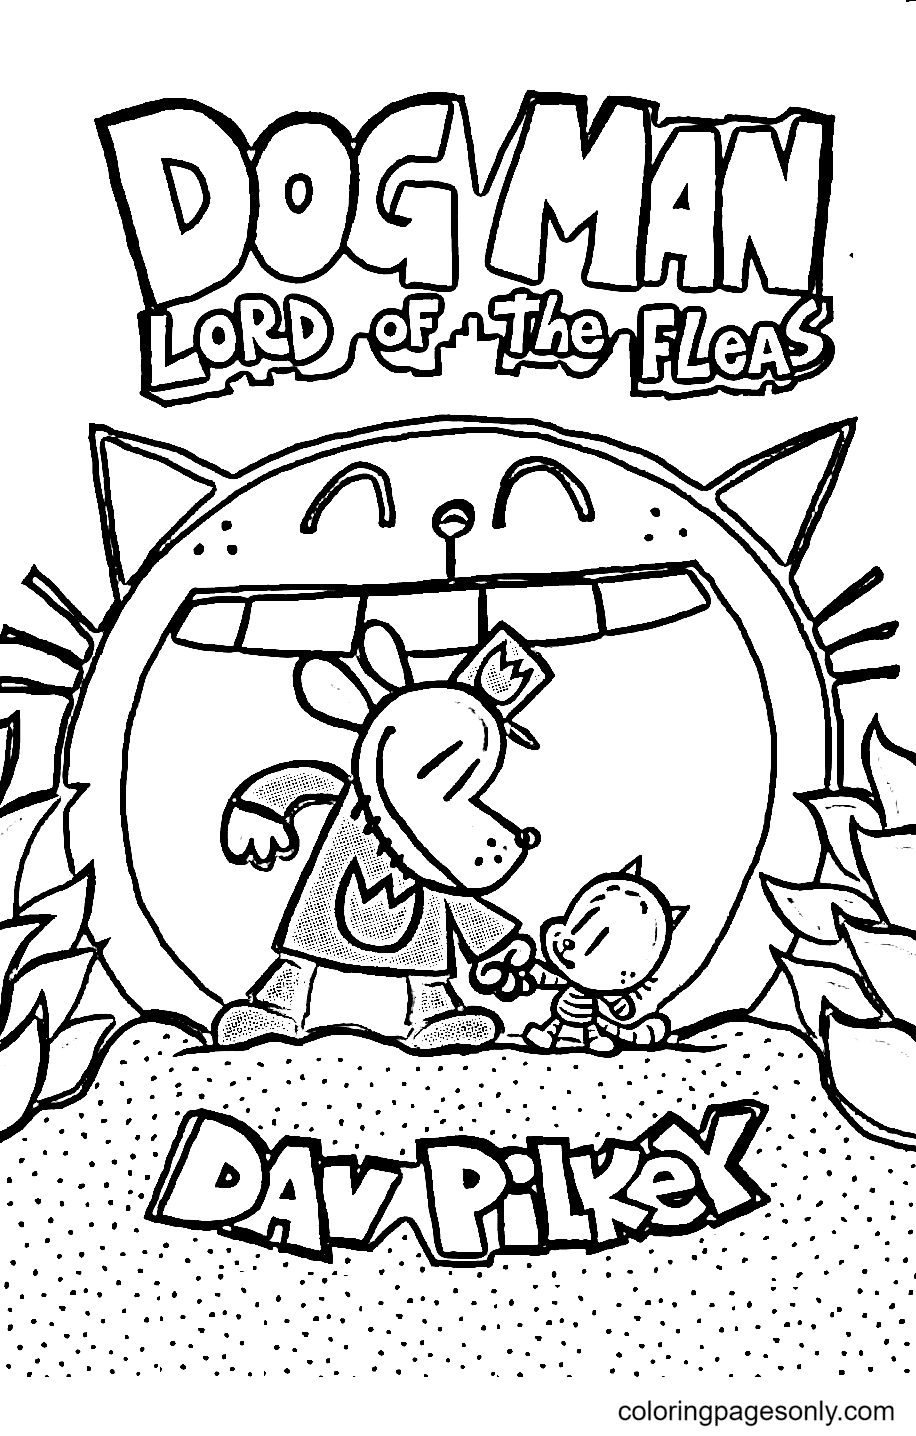 Dog Man Lord of the Fleas Coloring Page